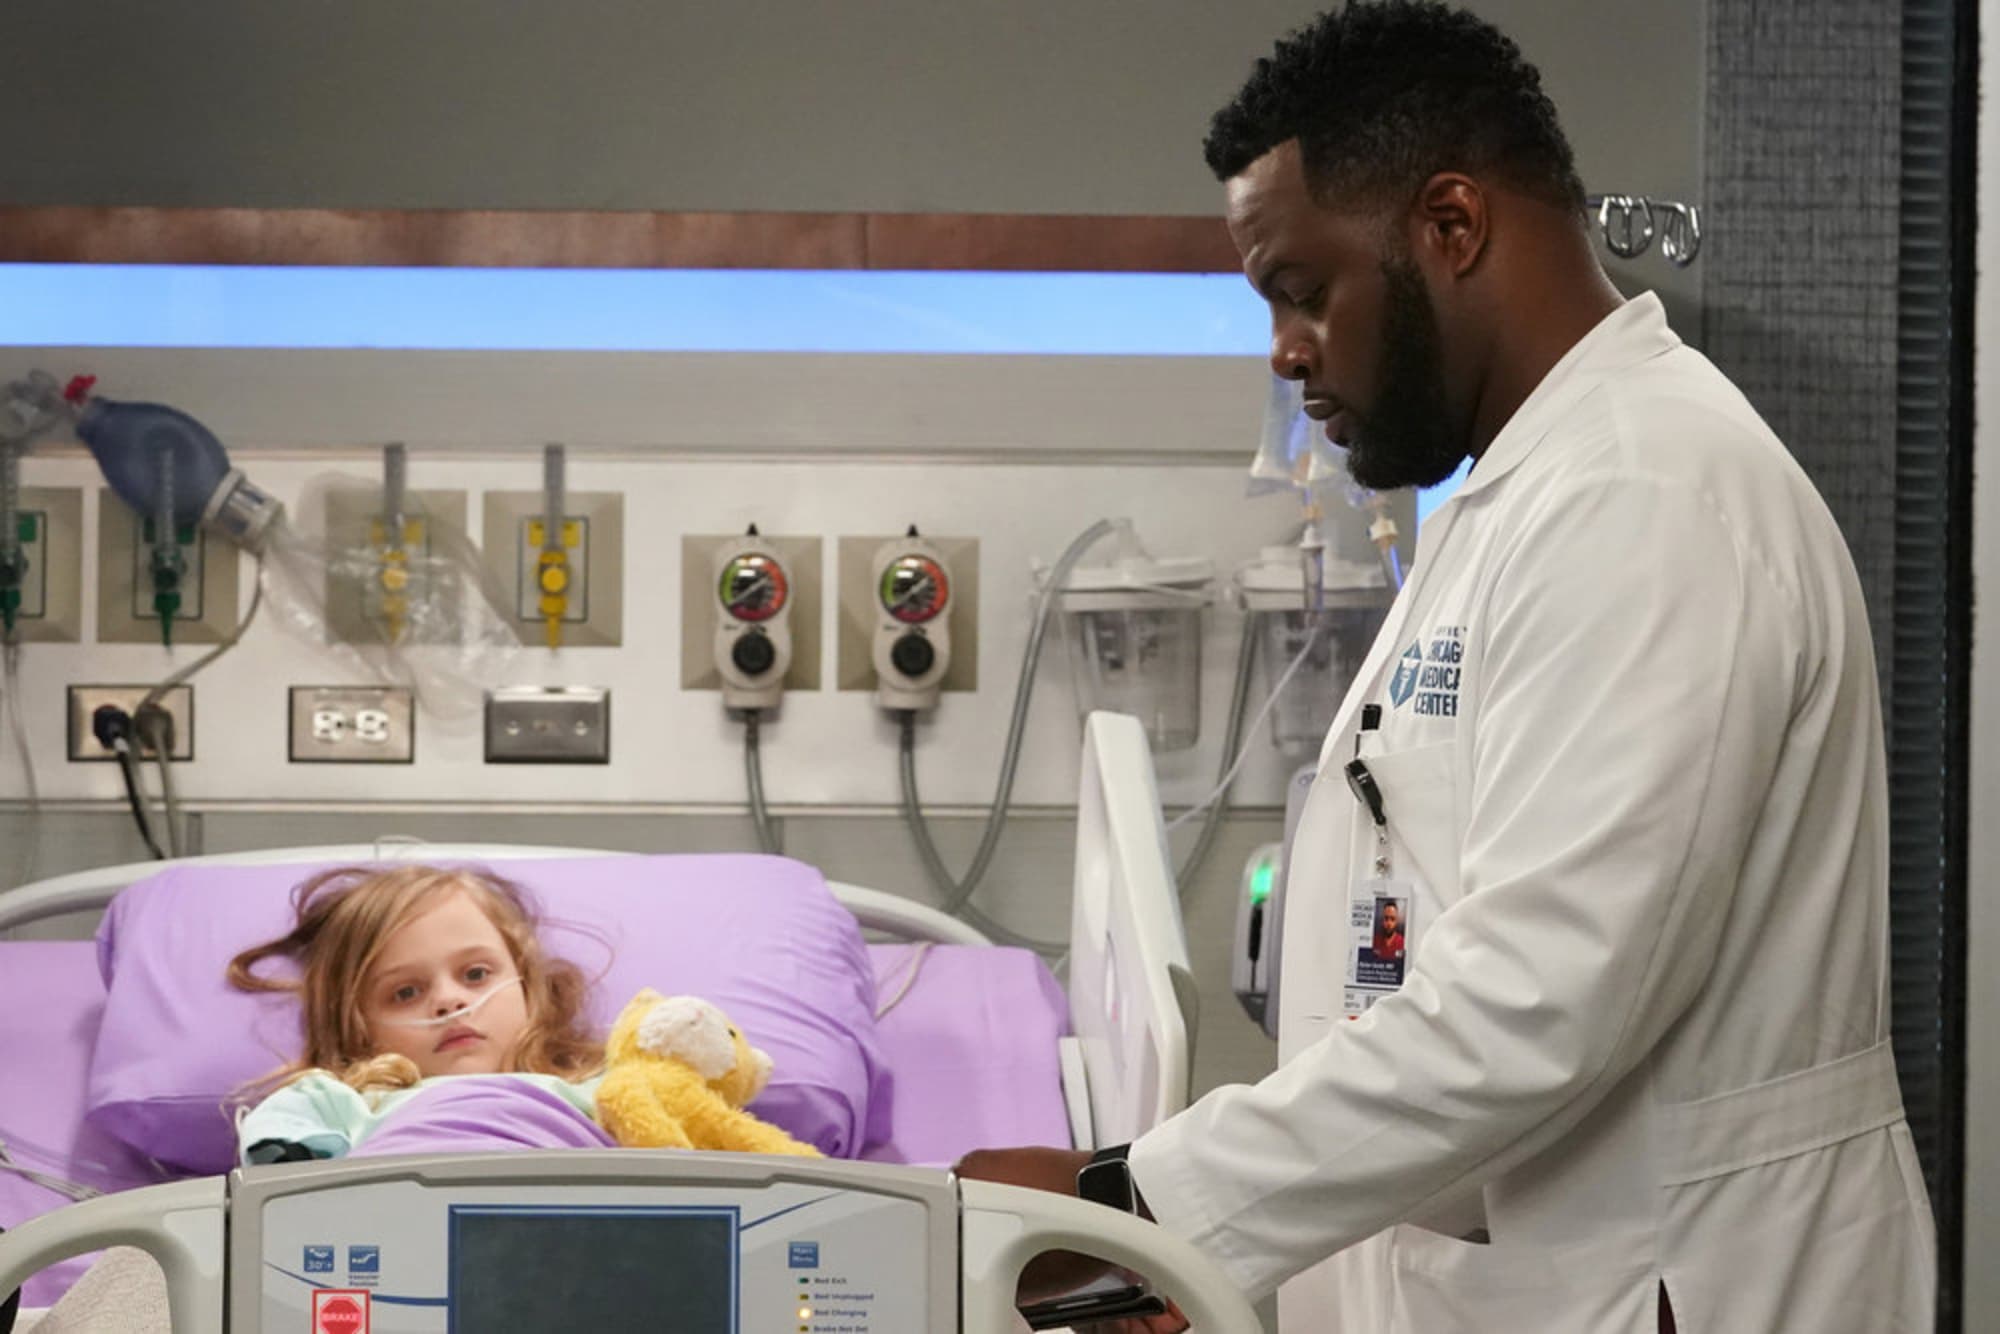 Chicago Med Season 8 Episode 9: Could Be The Start of Something New